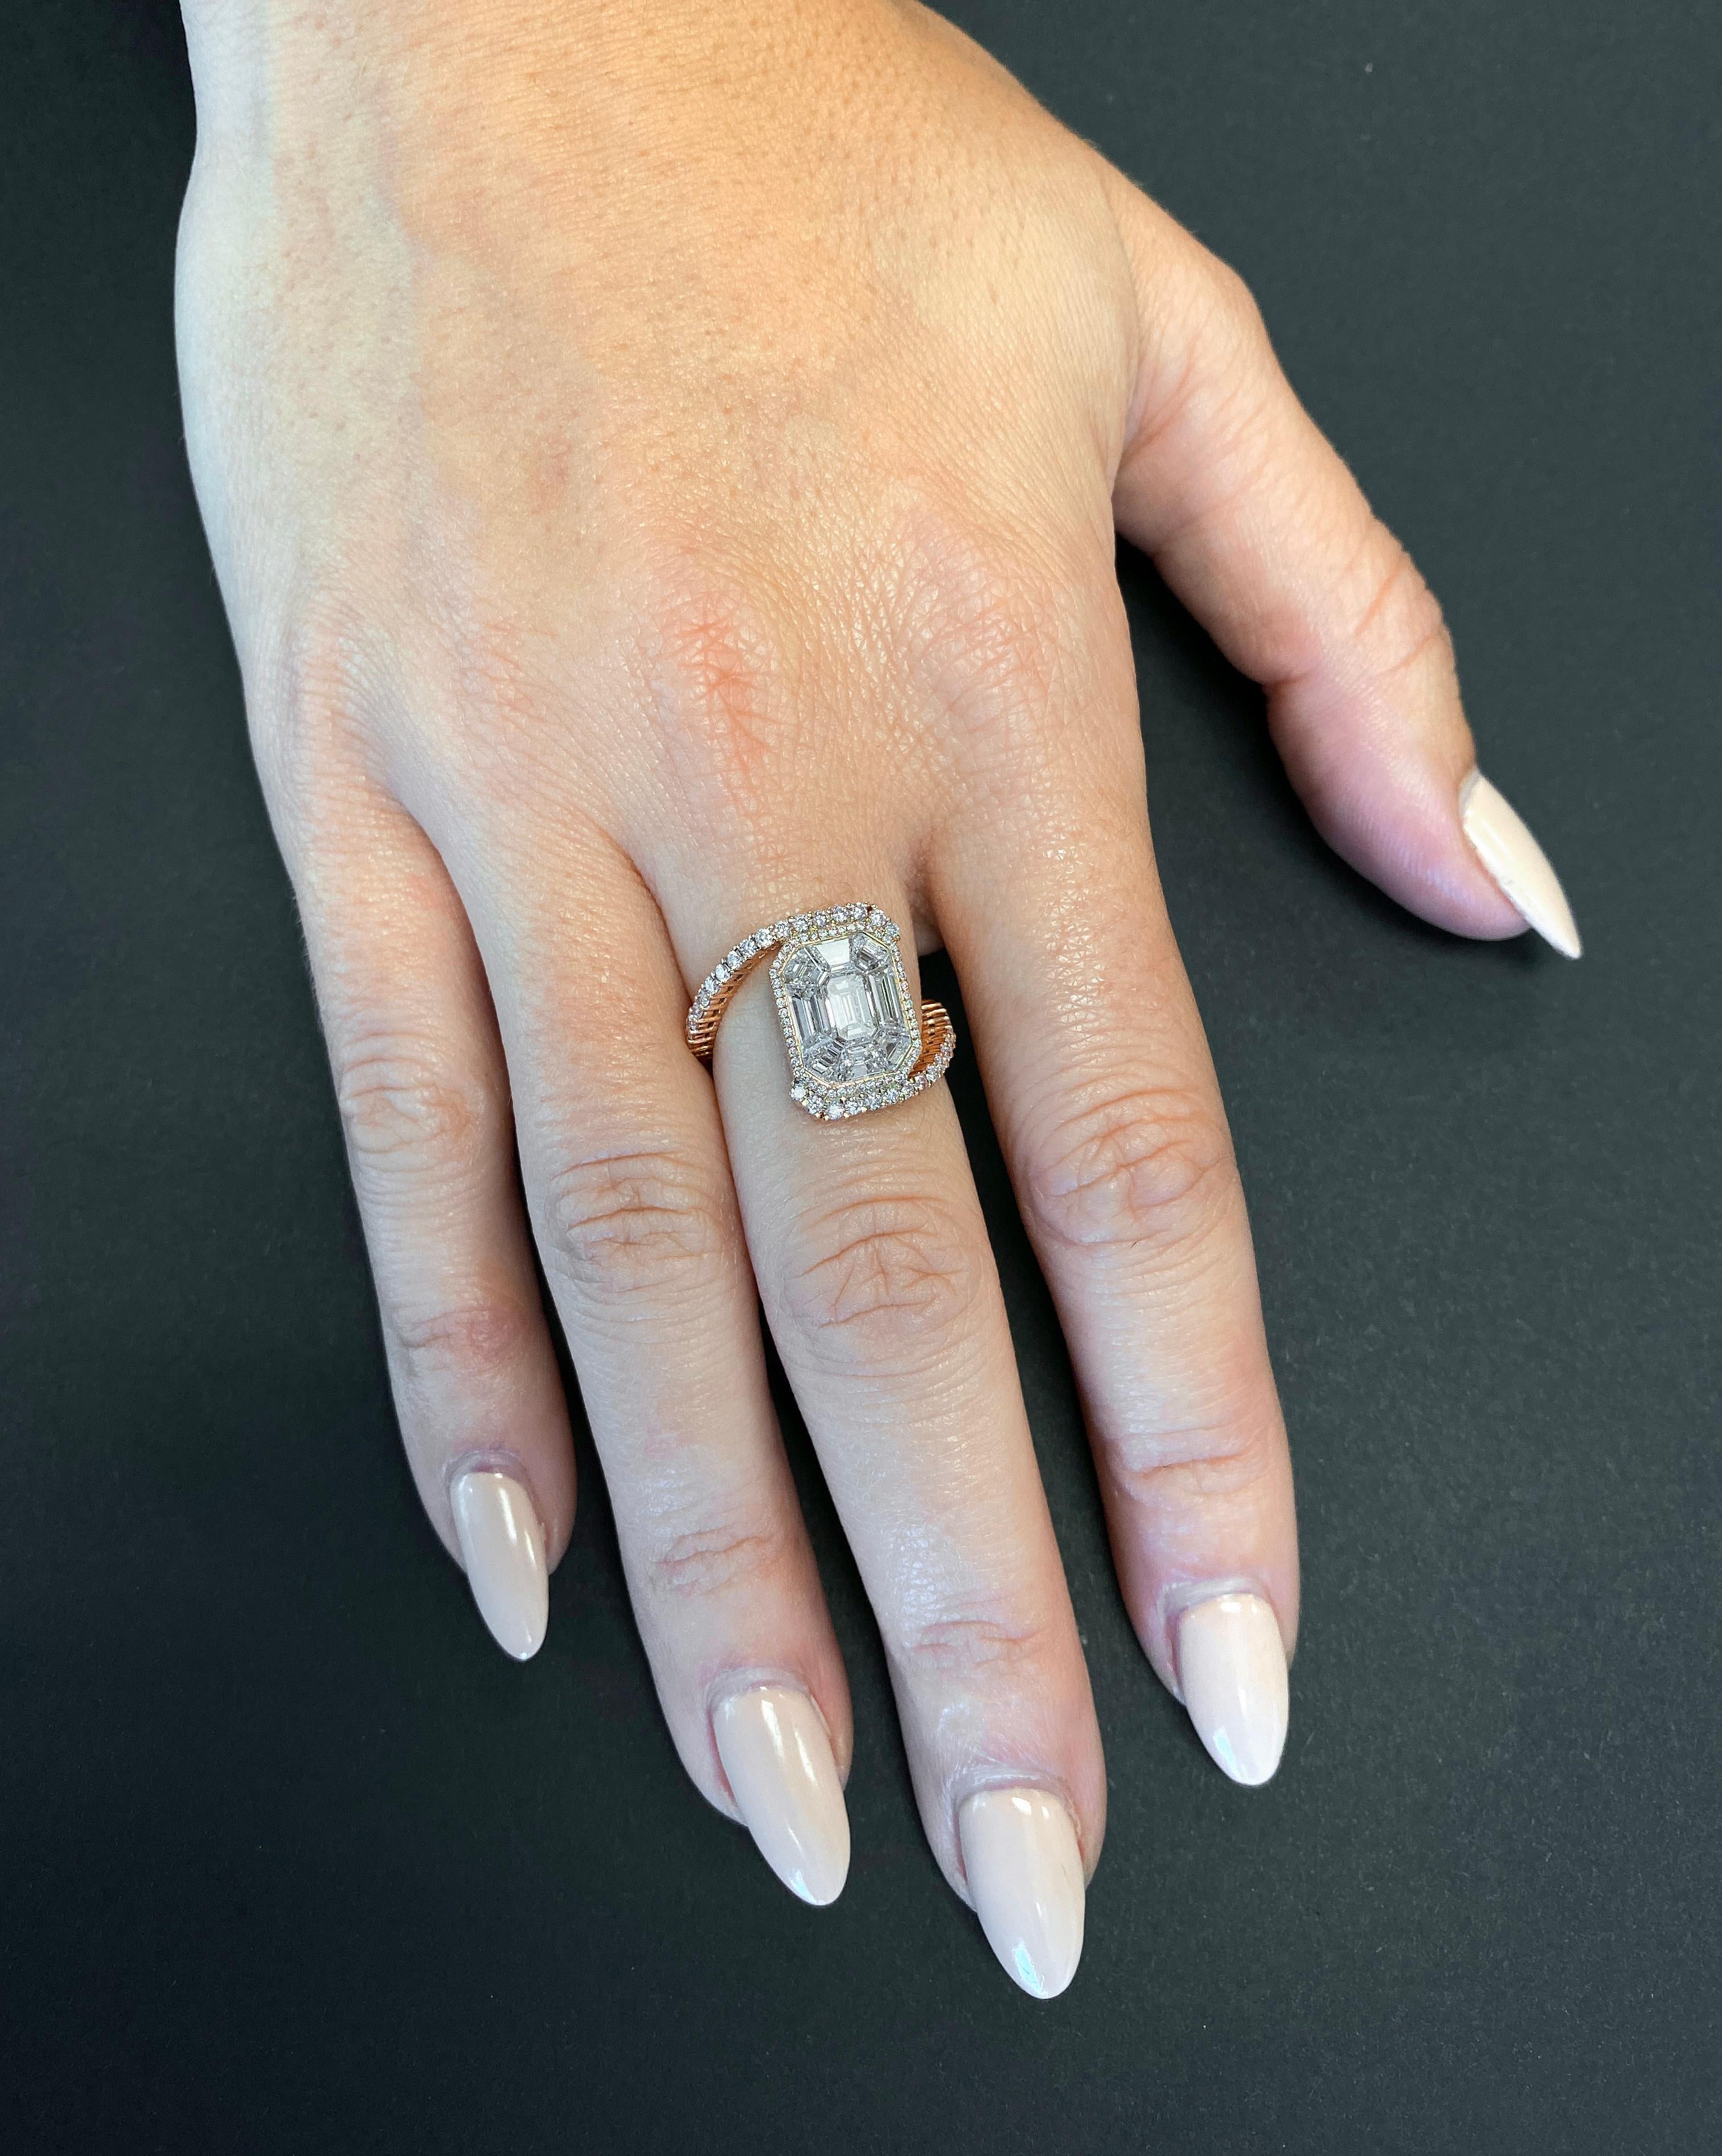 The Emerald Cluster Diamond Ring
1.66CT Emerald Cut White Diamond Center Stone
.60CT White Diamonds Pave set onto 18KT Rose Gold.
Crafted to order. Please allow up to 3 weeks for delivery.